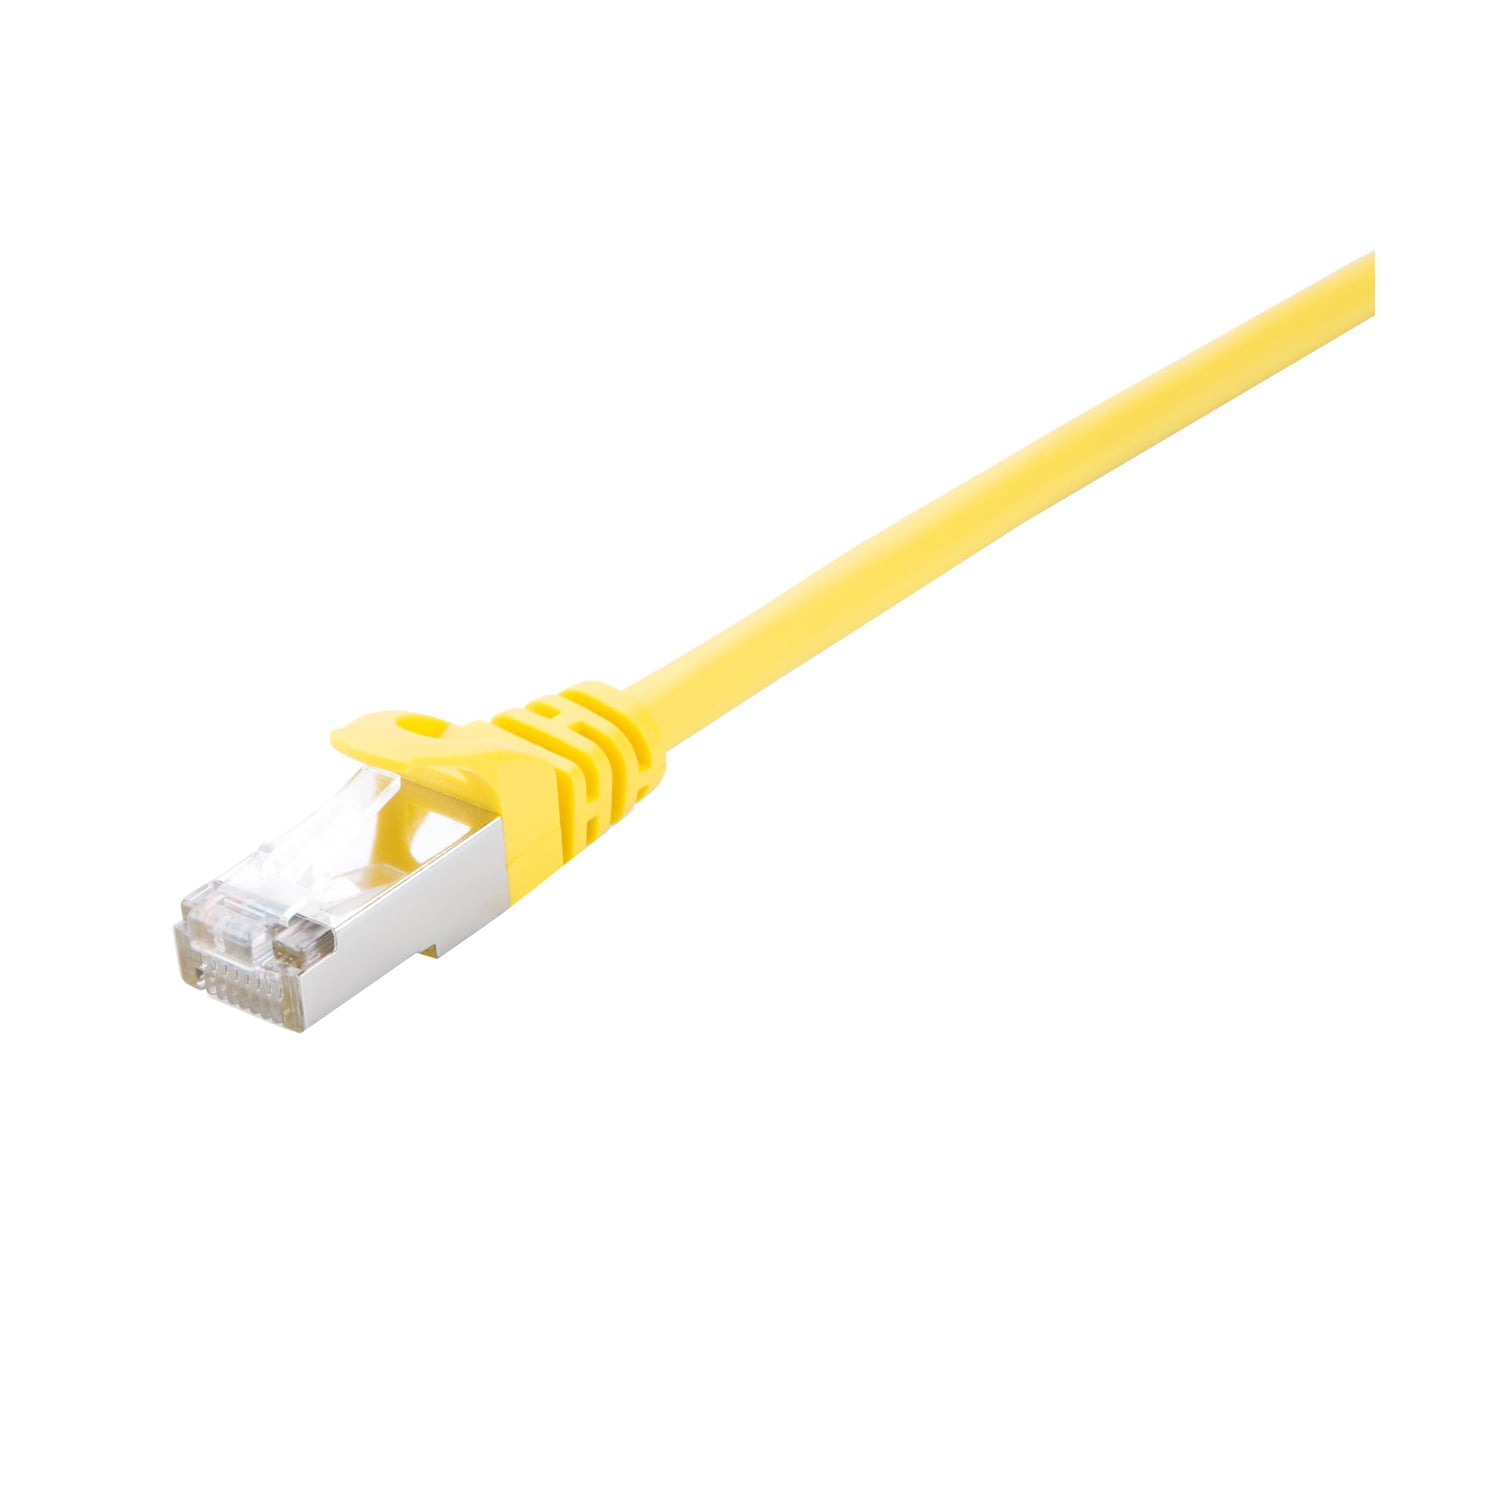 8P8C Cross Over Patch Gray Cable RJ45 Male to Rj45 Male for Networking Cat6 UnShielded 25 Meter